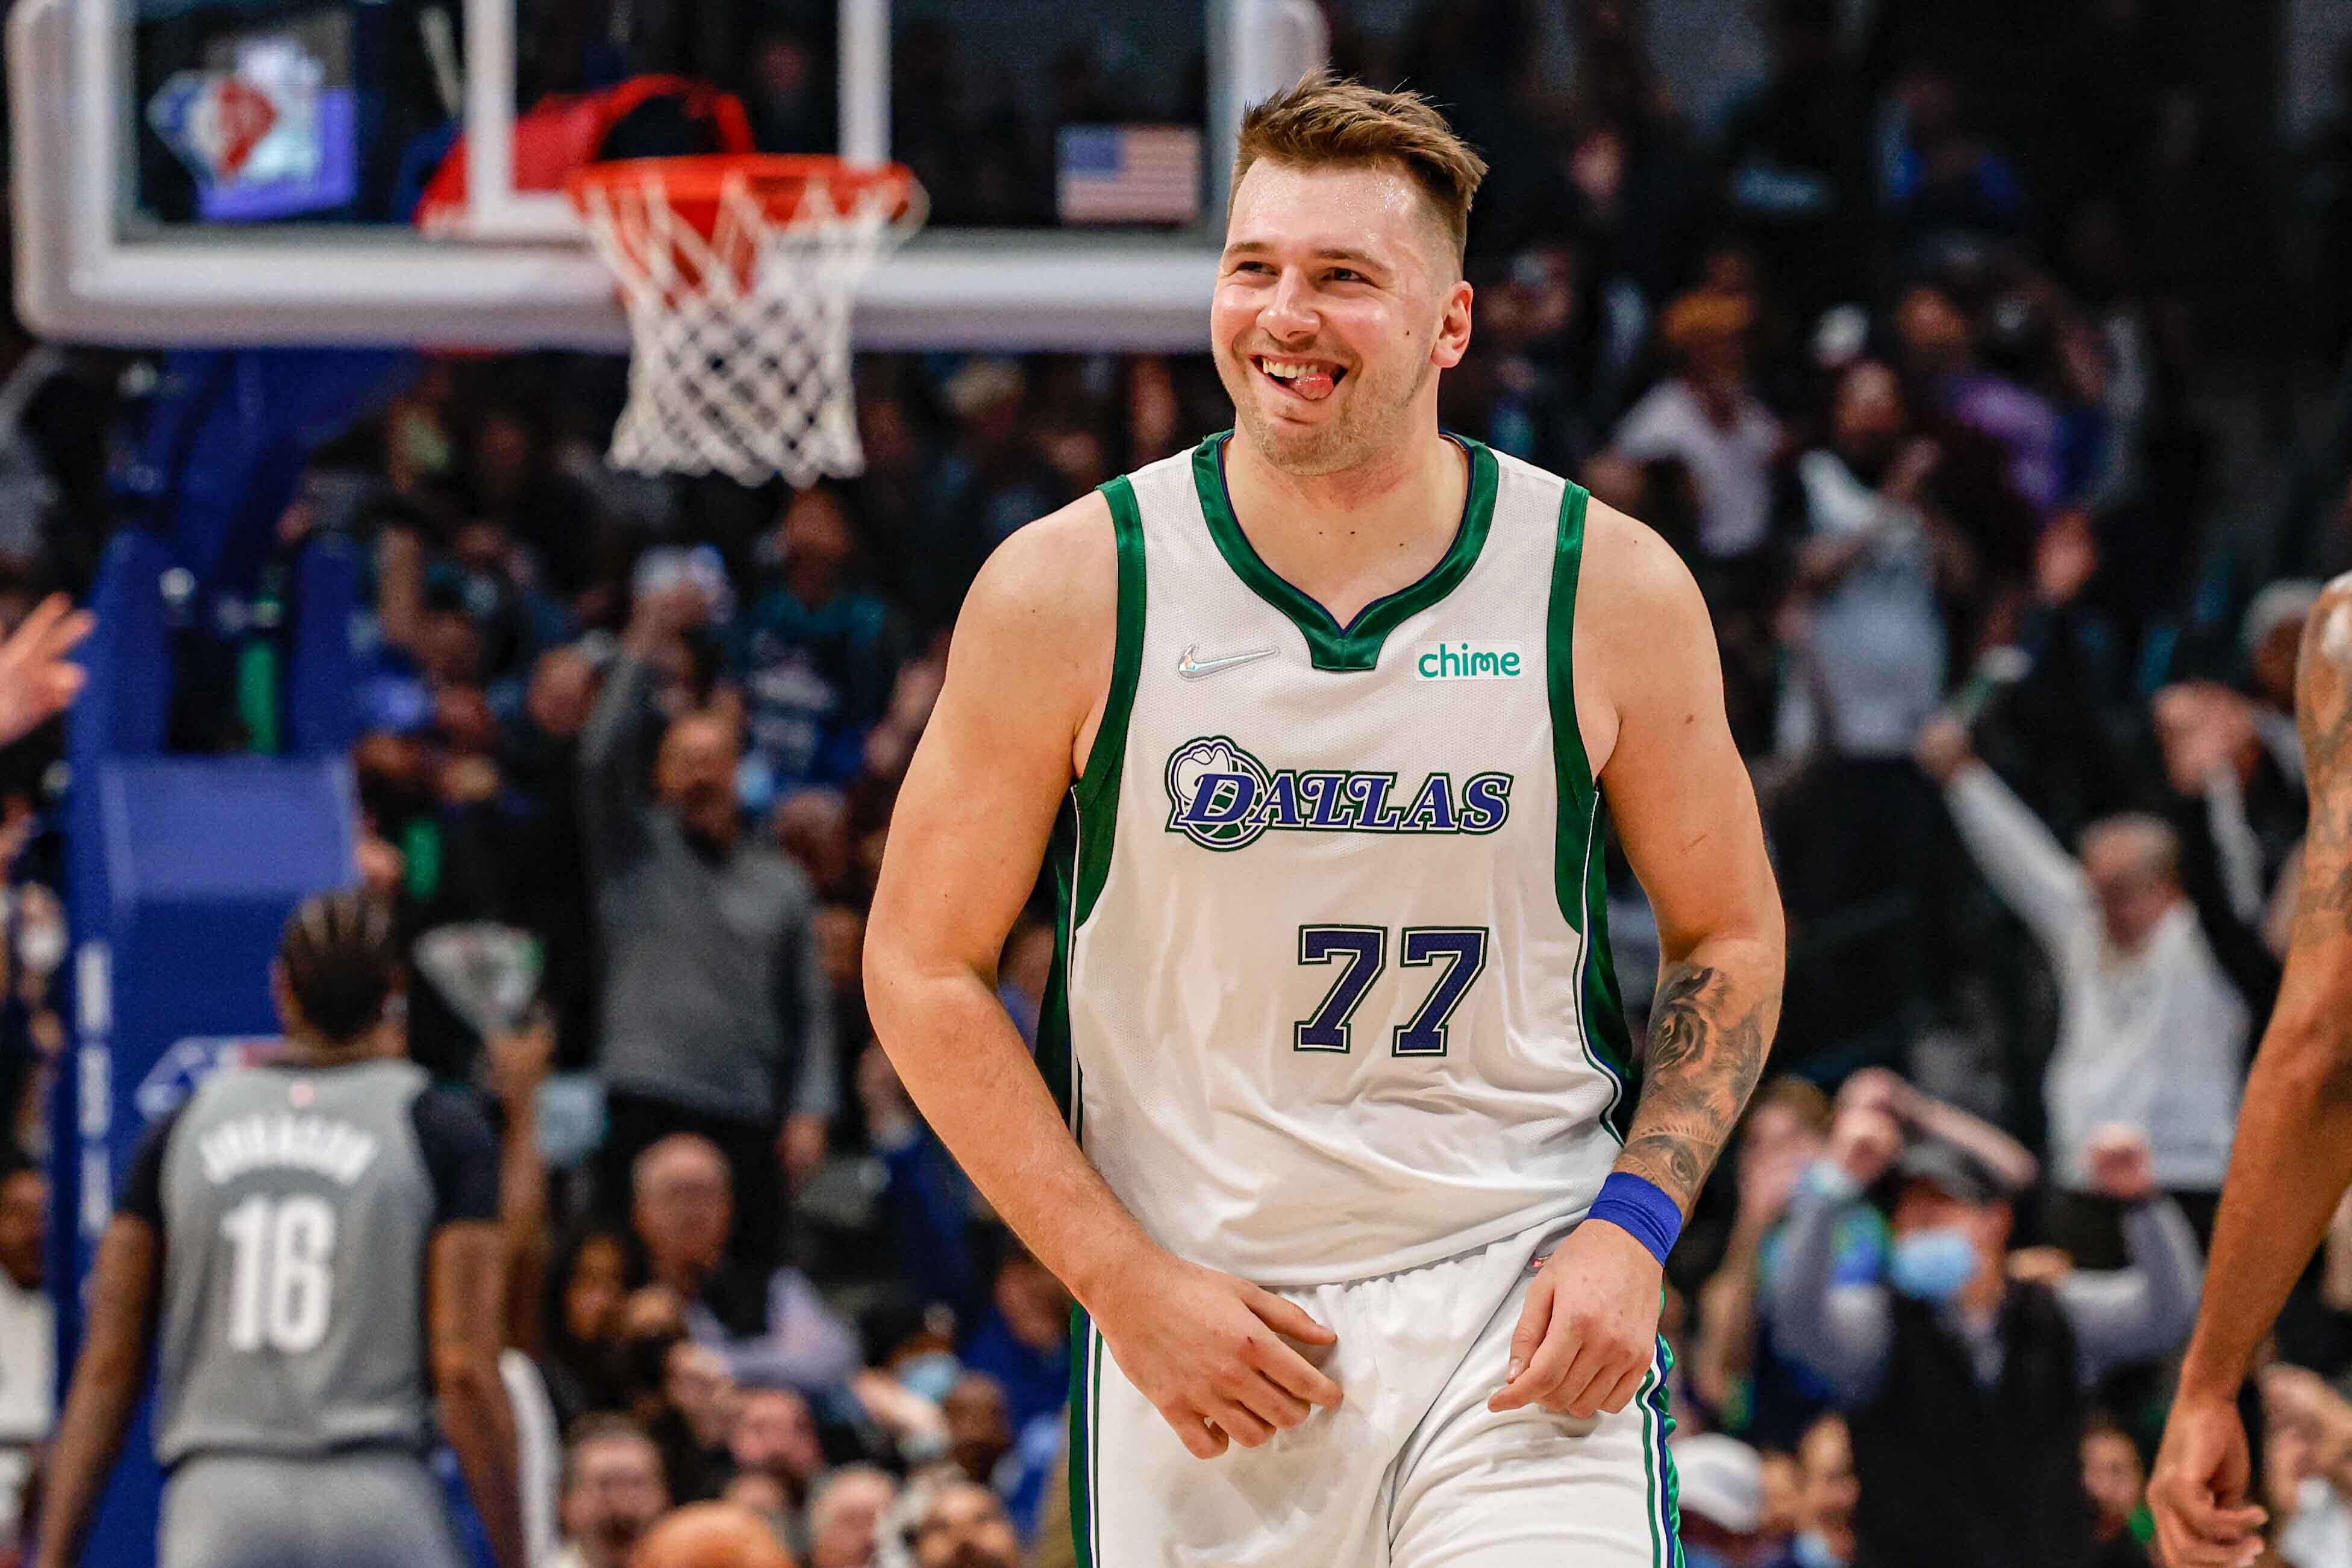 doncic jersey 2022